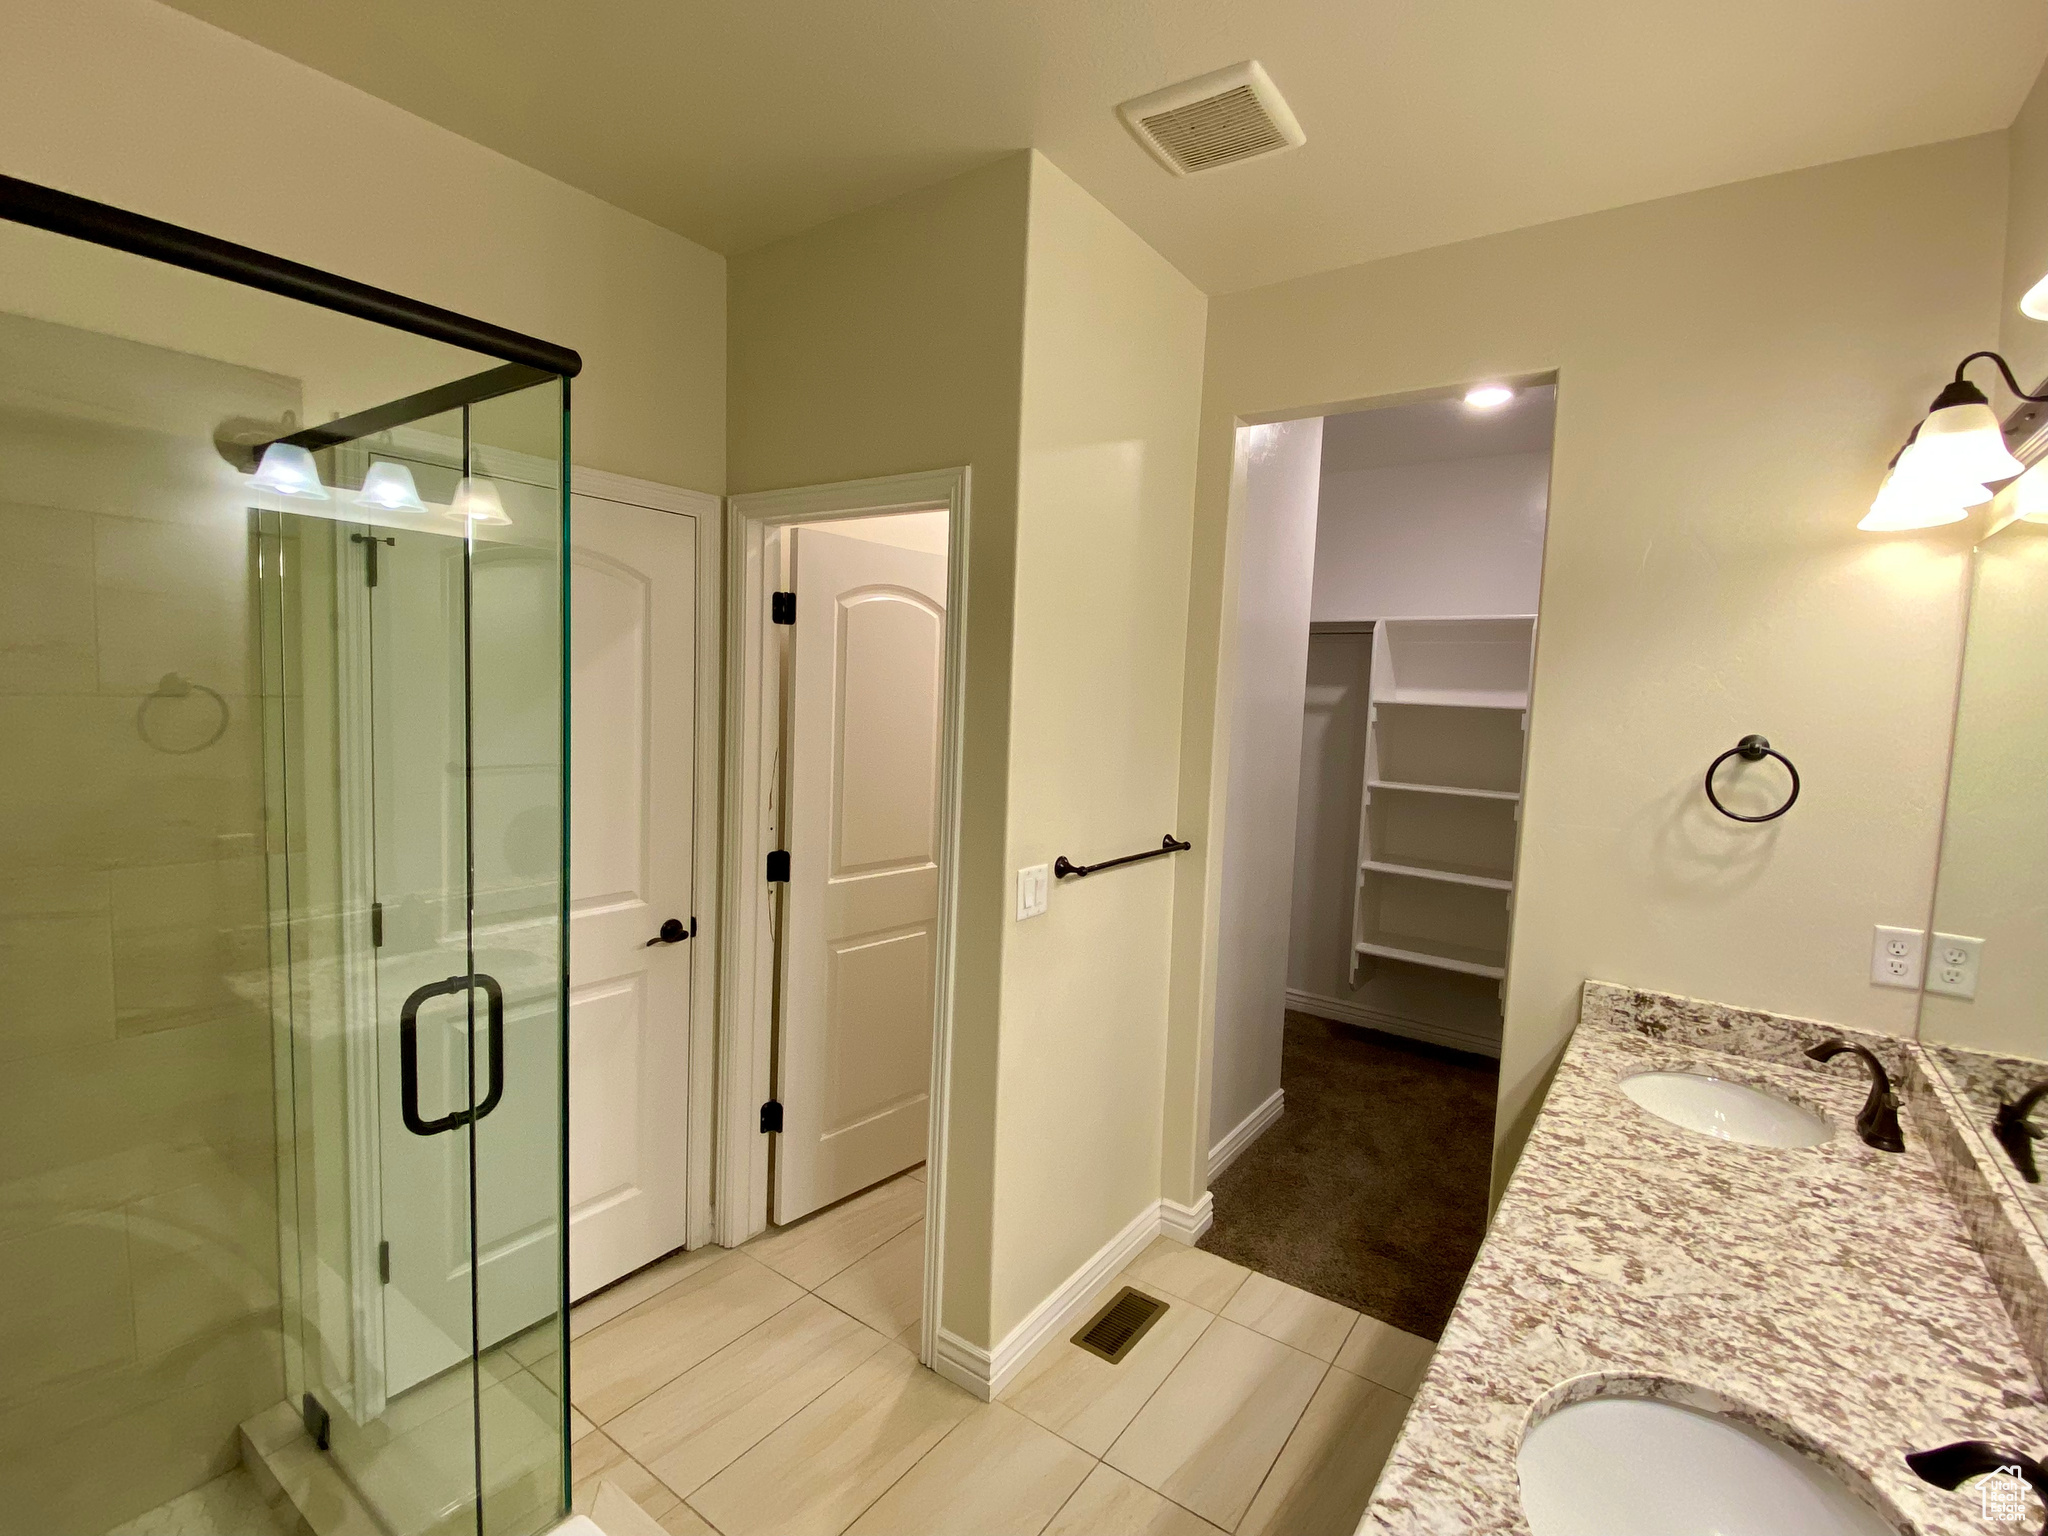 Master suite. Separate tub and shower feature with Walk in closet